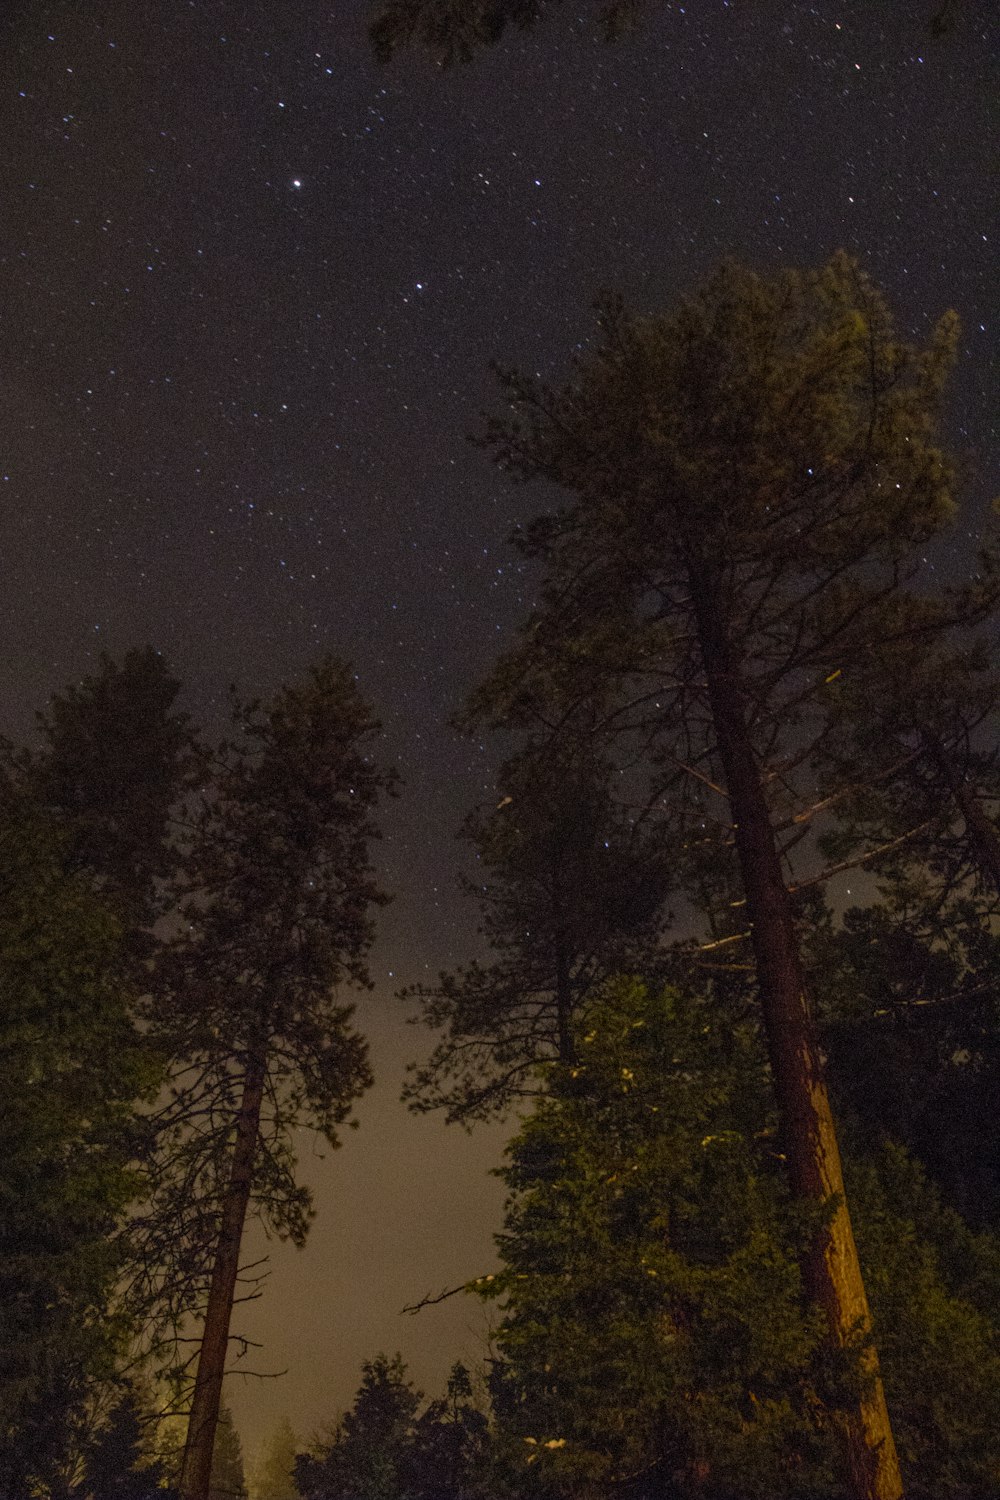 the night sky is lit up by the stars above the trees